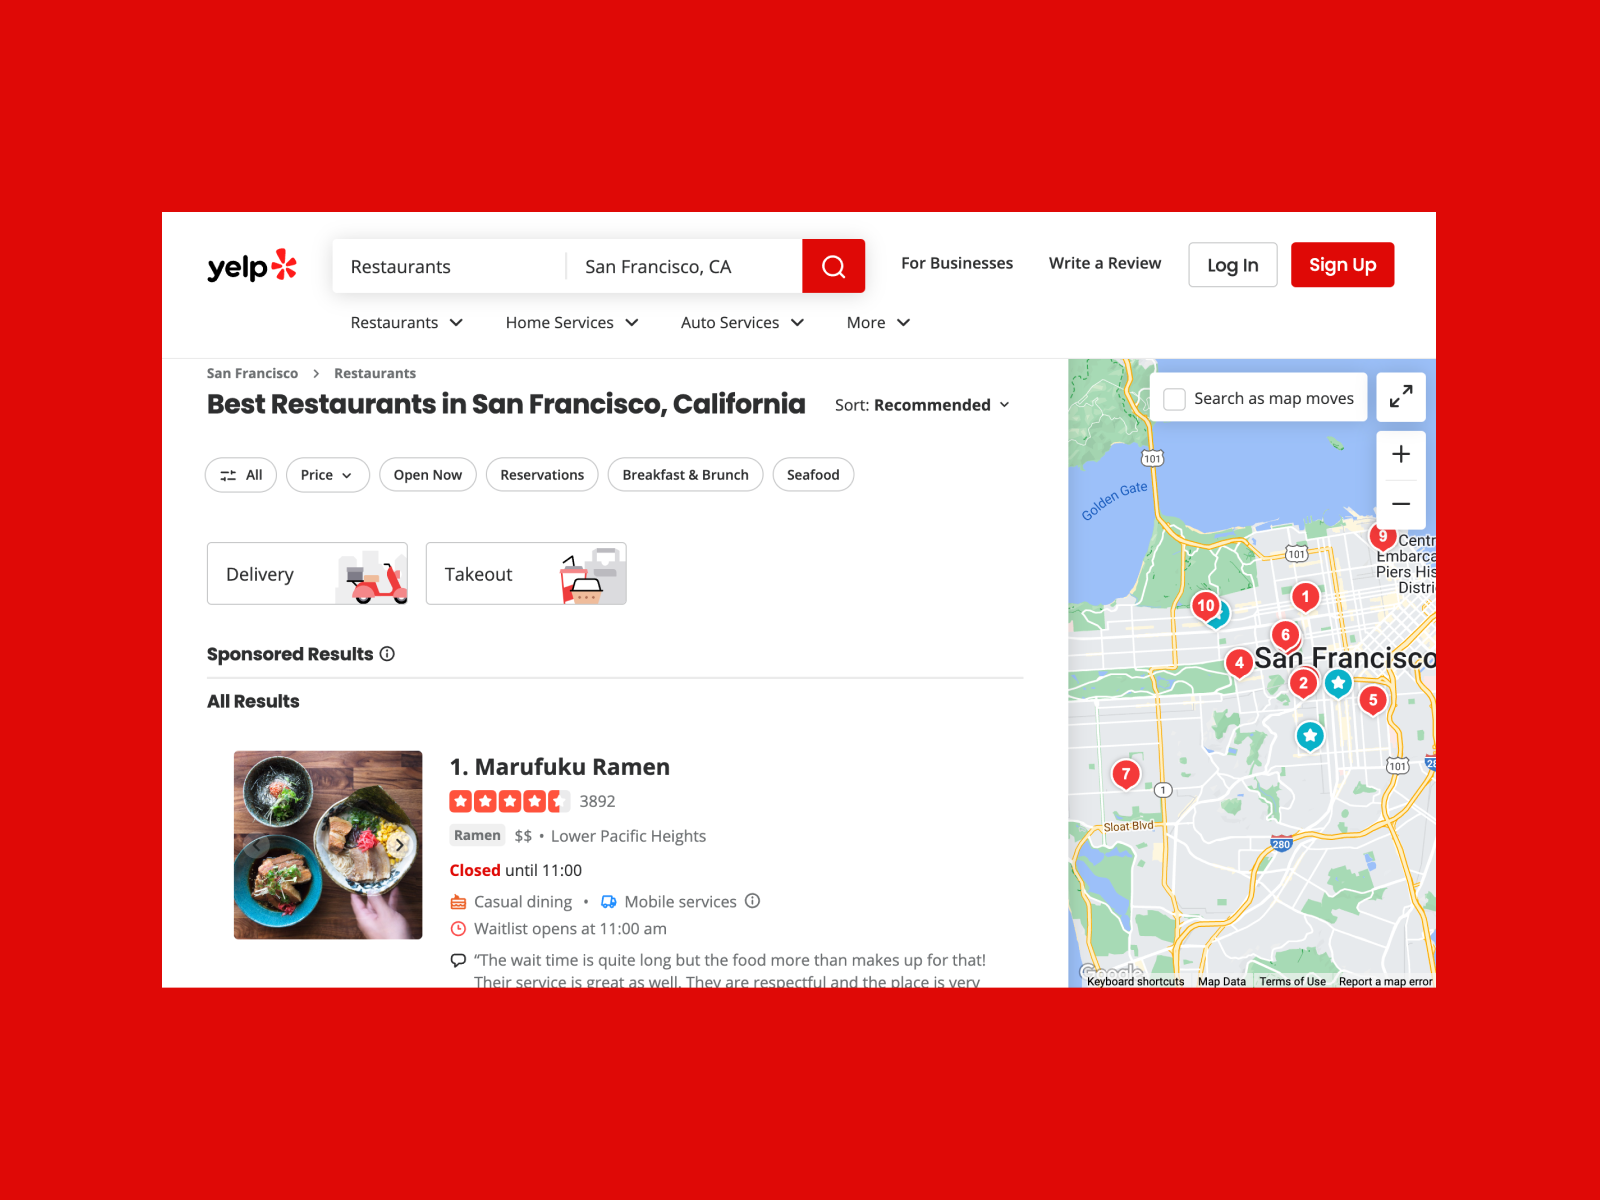 Example of Yelp’s search functionality